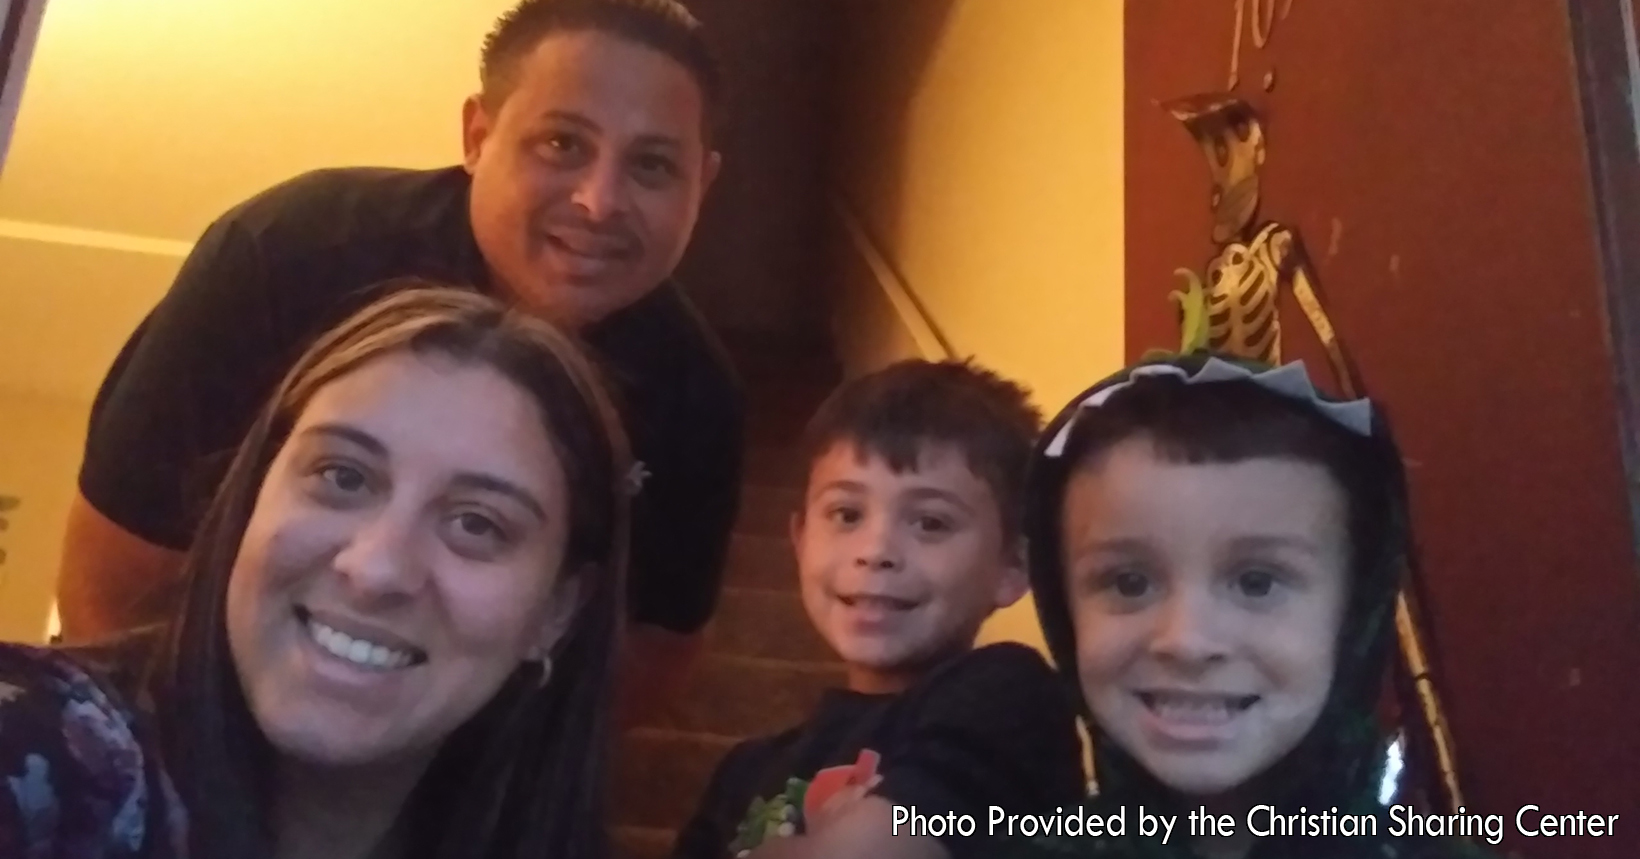 Captured by Teresa Engle a LifeBuilder Case Manager, a family gathers to take a photo during their time with the LifeBuilder program. This family of a mother and father with two young boys, started their journey with LifeBuilder in September of 2019.